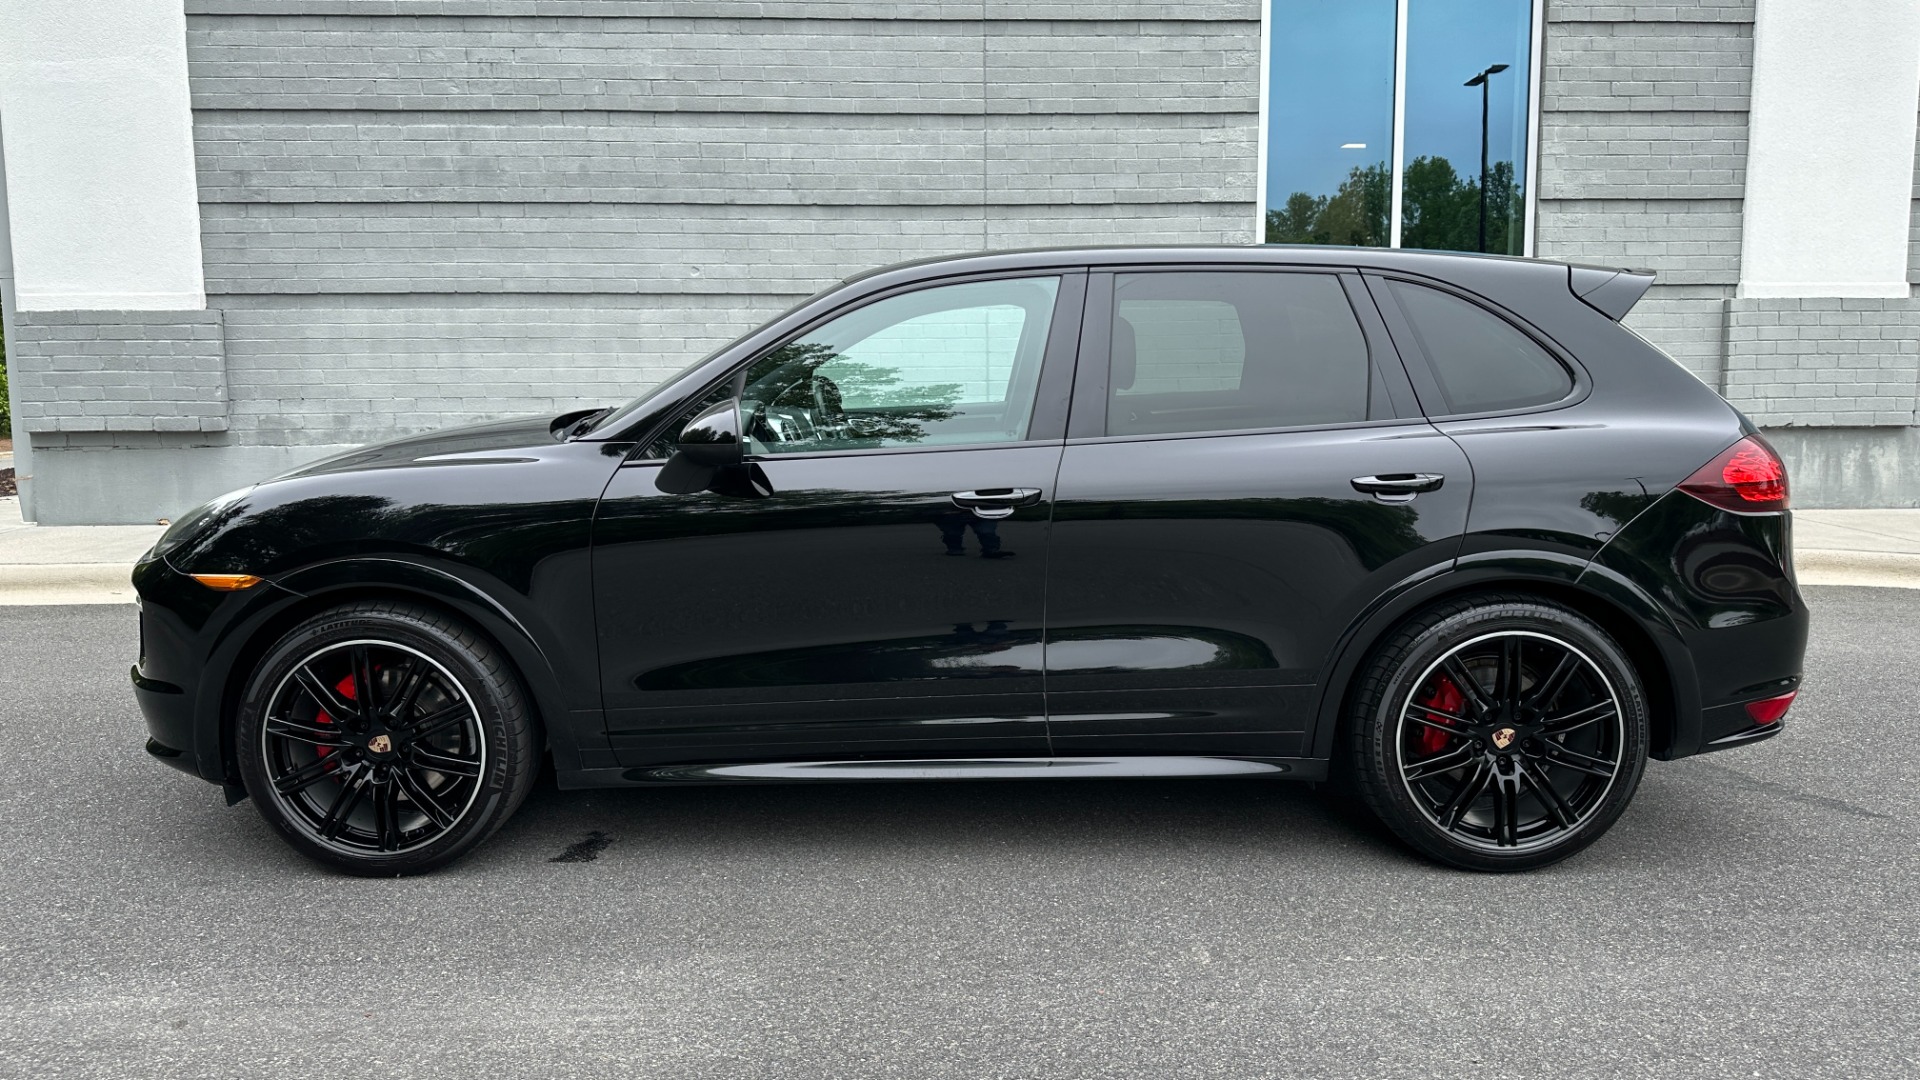 Used 2014 Porsche Cayenne GTS / SPORT WHEELS / COMFORT PKG / PANORAMIC ROOF for sale $31,995 at Formula Imports in Charlotte NC 28227 3